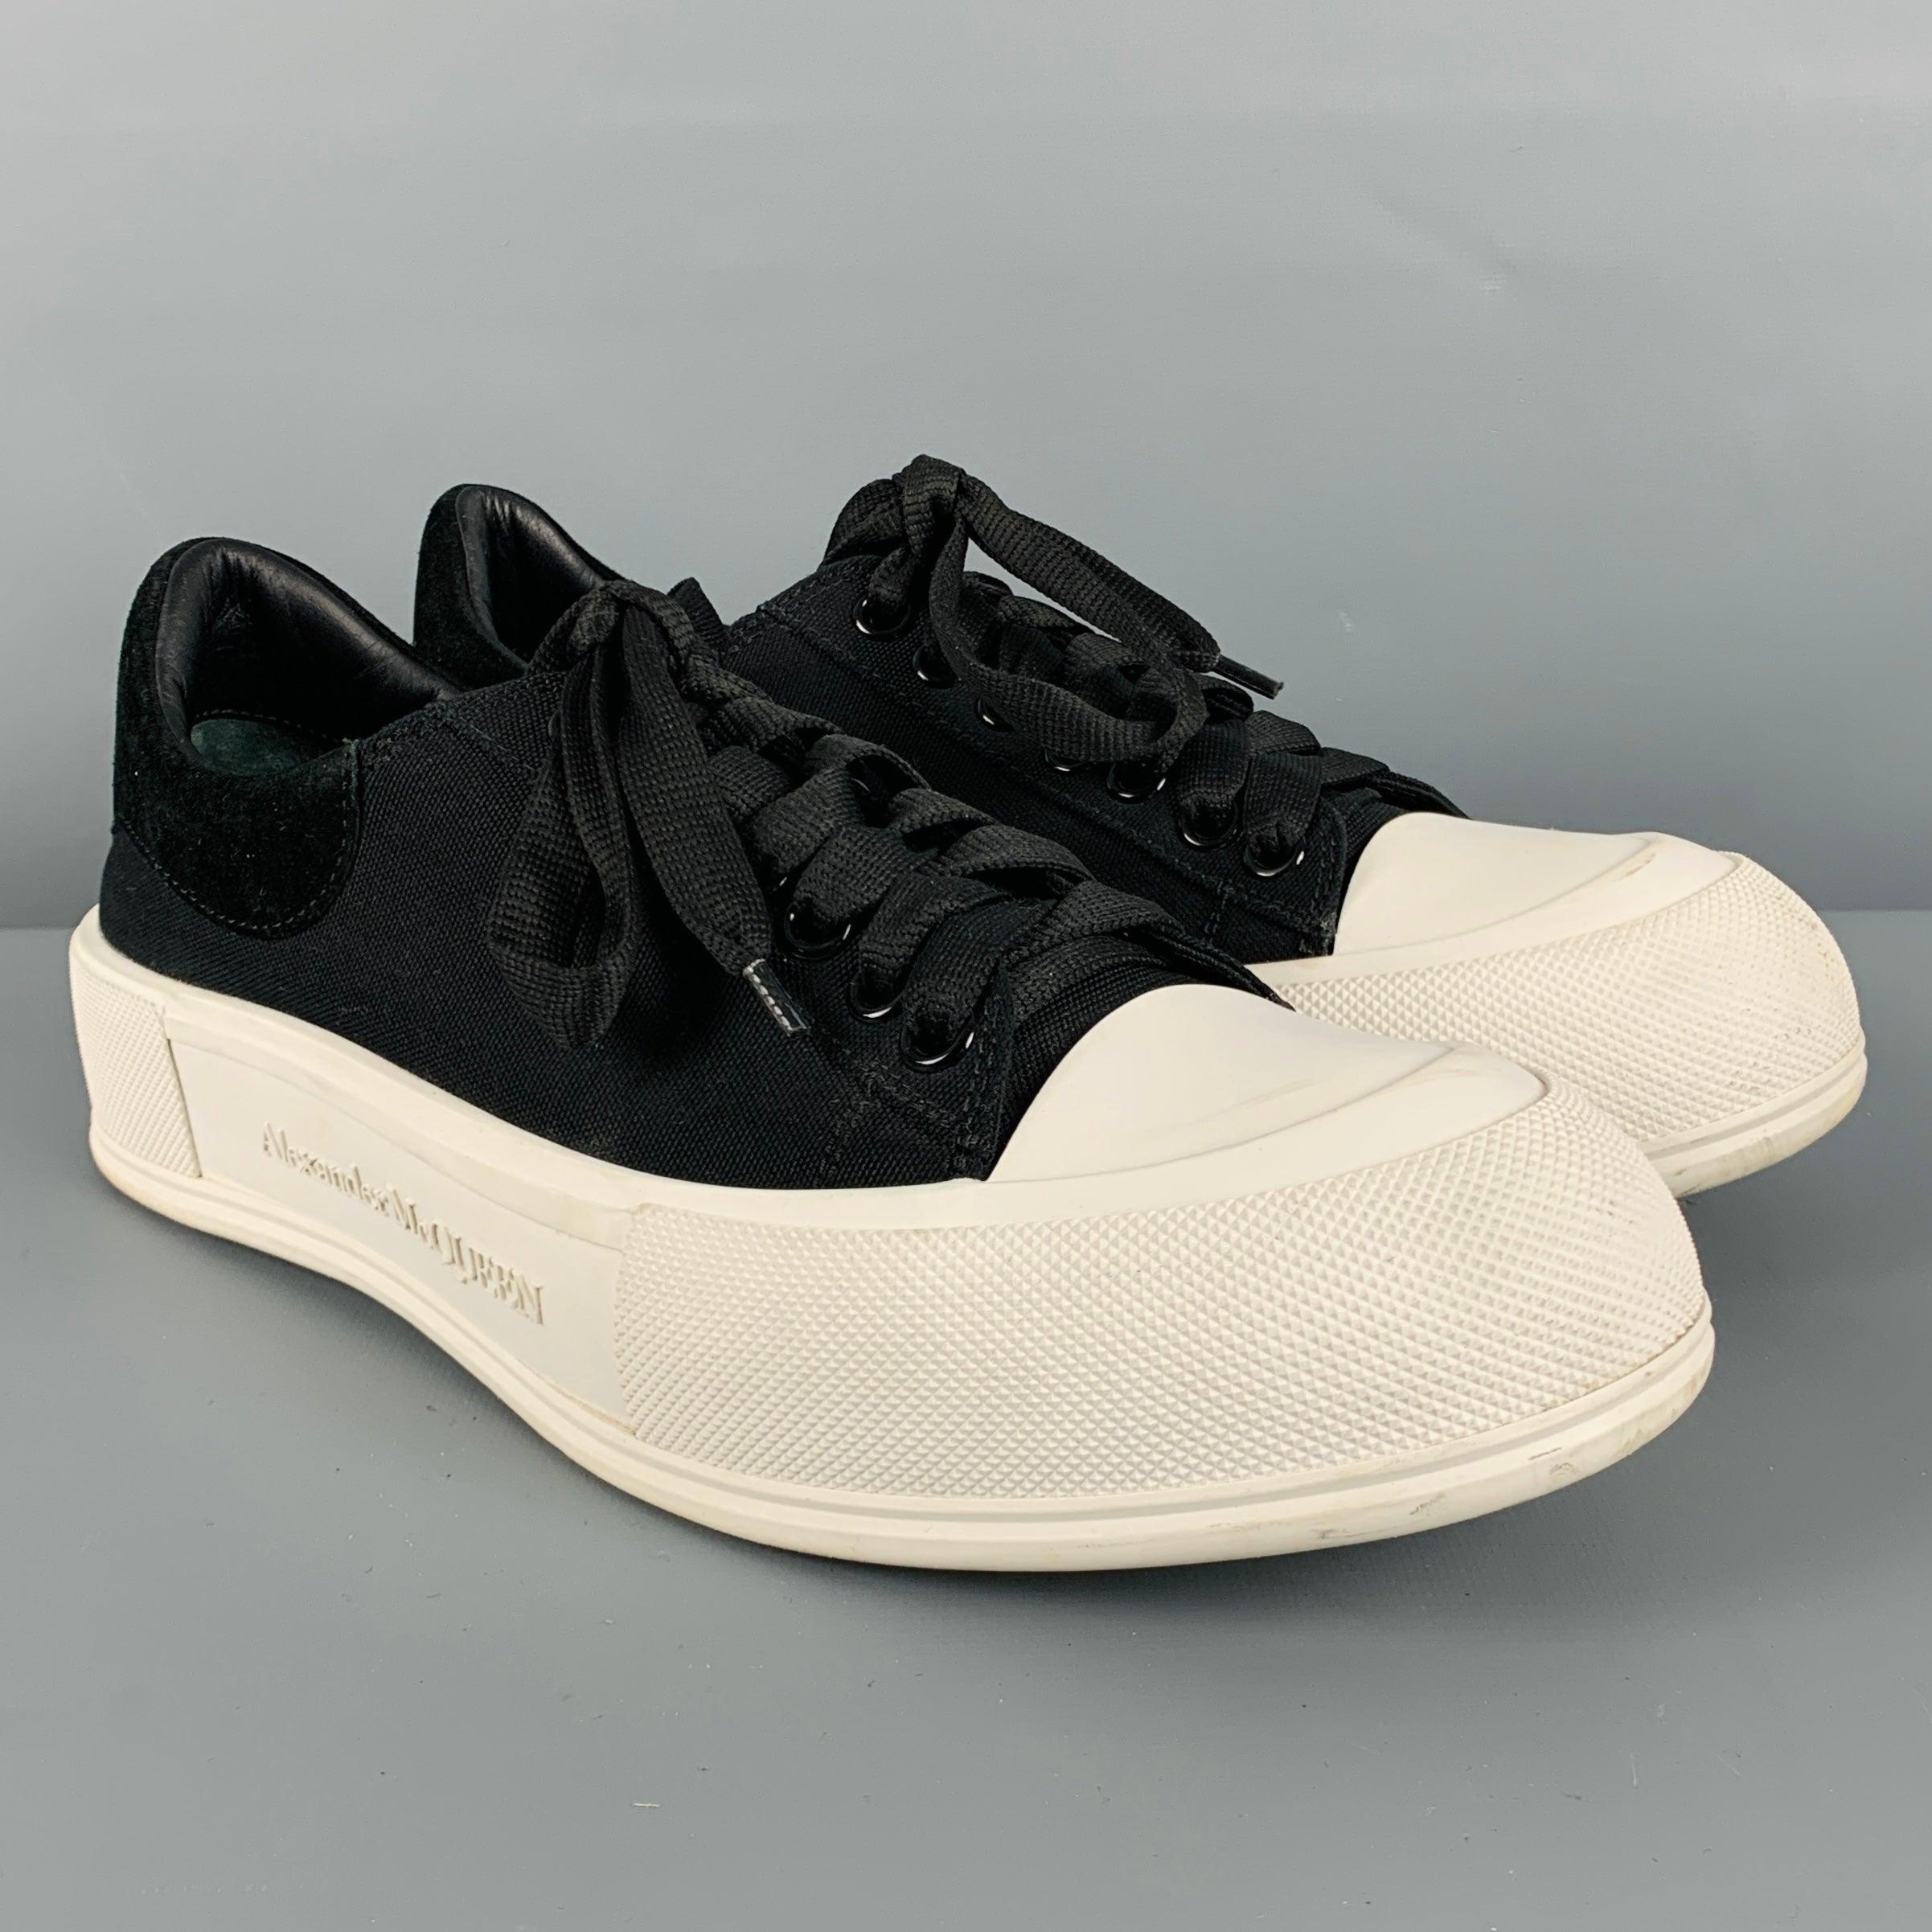 ALEXANDER MCQUEEN sneakers
in black canvas fabric featuring a two tone low top style, velvet heel detail, chunky rubber sole, and lace-up closure. Made in Italy.Very Good Pre-Owned Condition. Moderate signs of wear. 

Marked:   43Outsole: 12 x 4.25